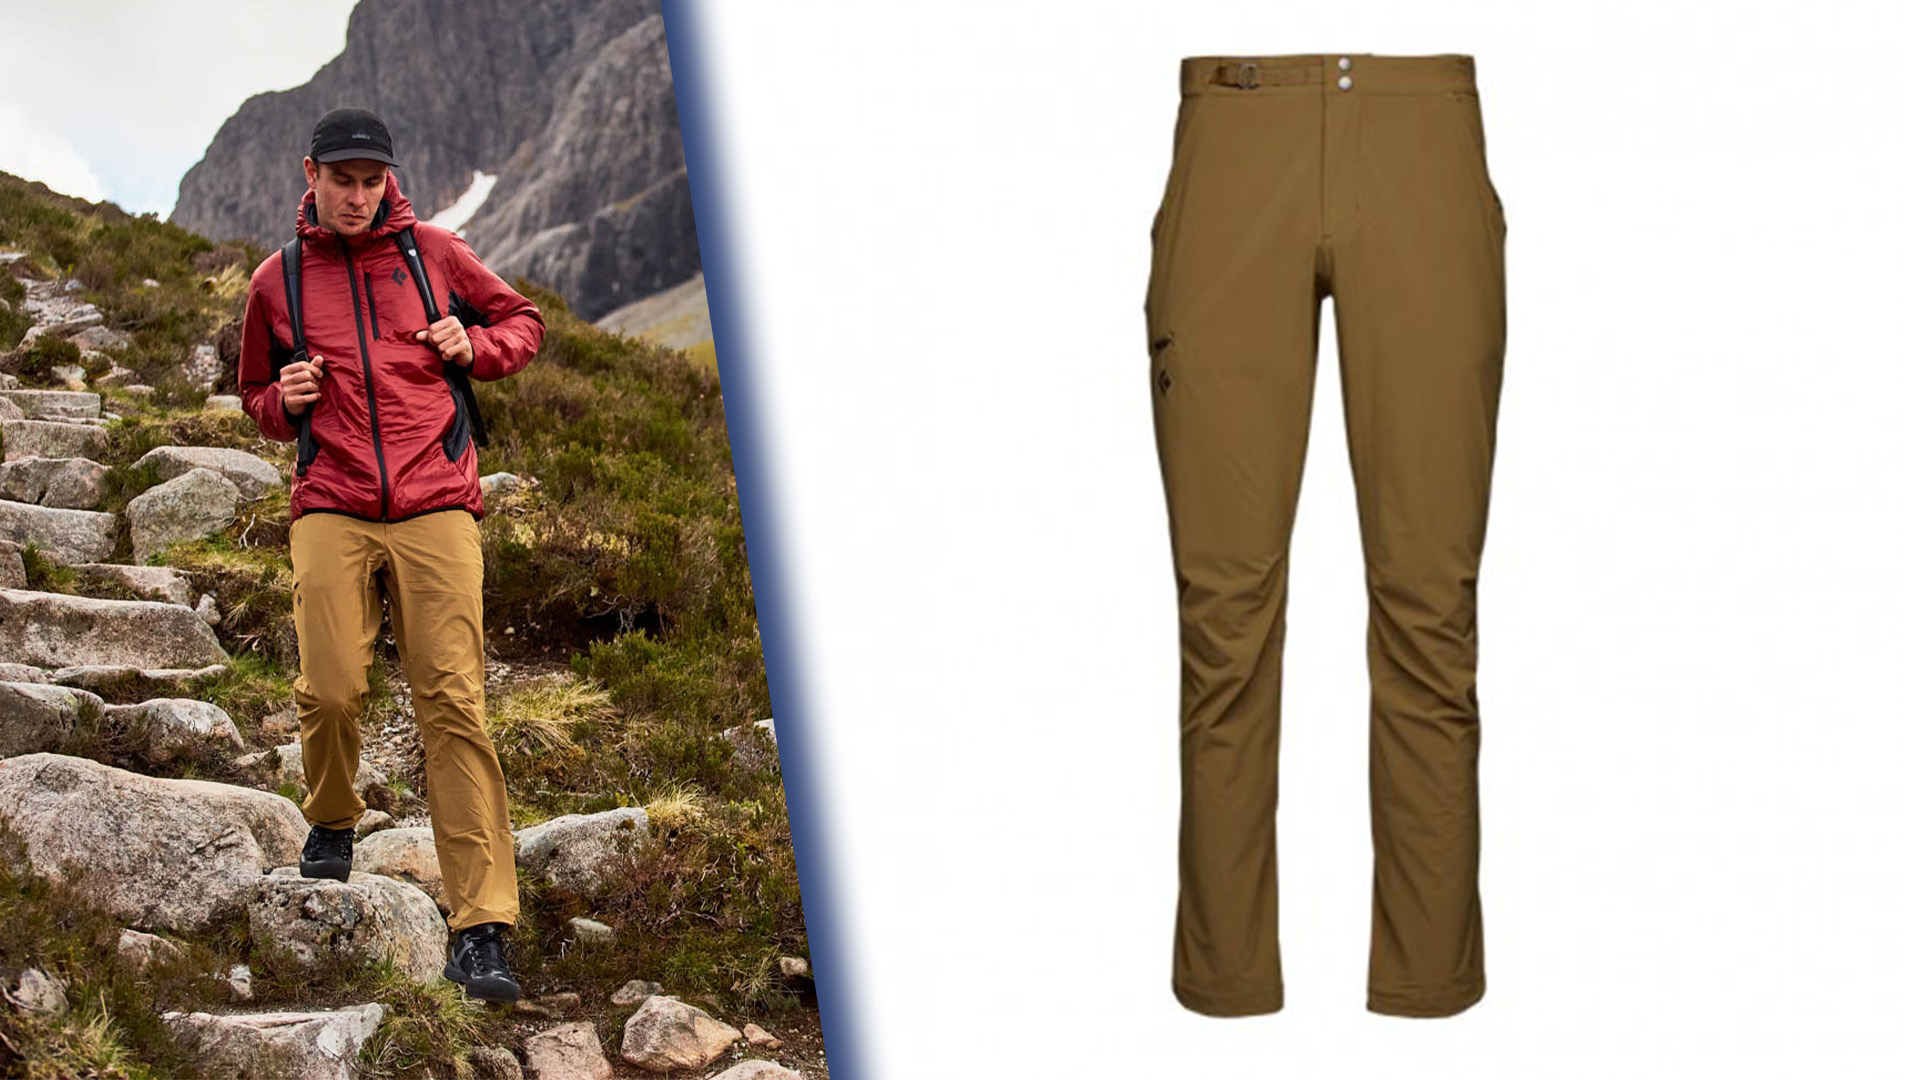 Softshell Trousers vs. Walking Trousers - a Comparison